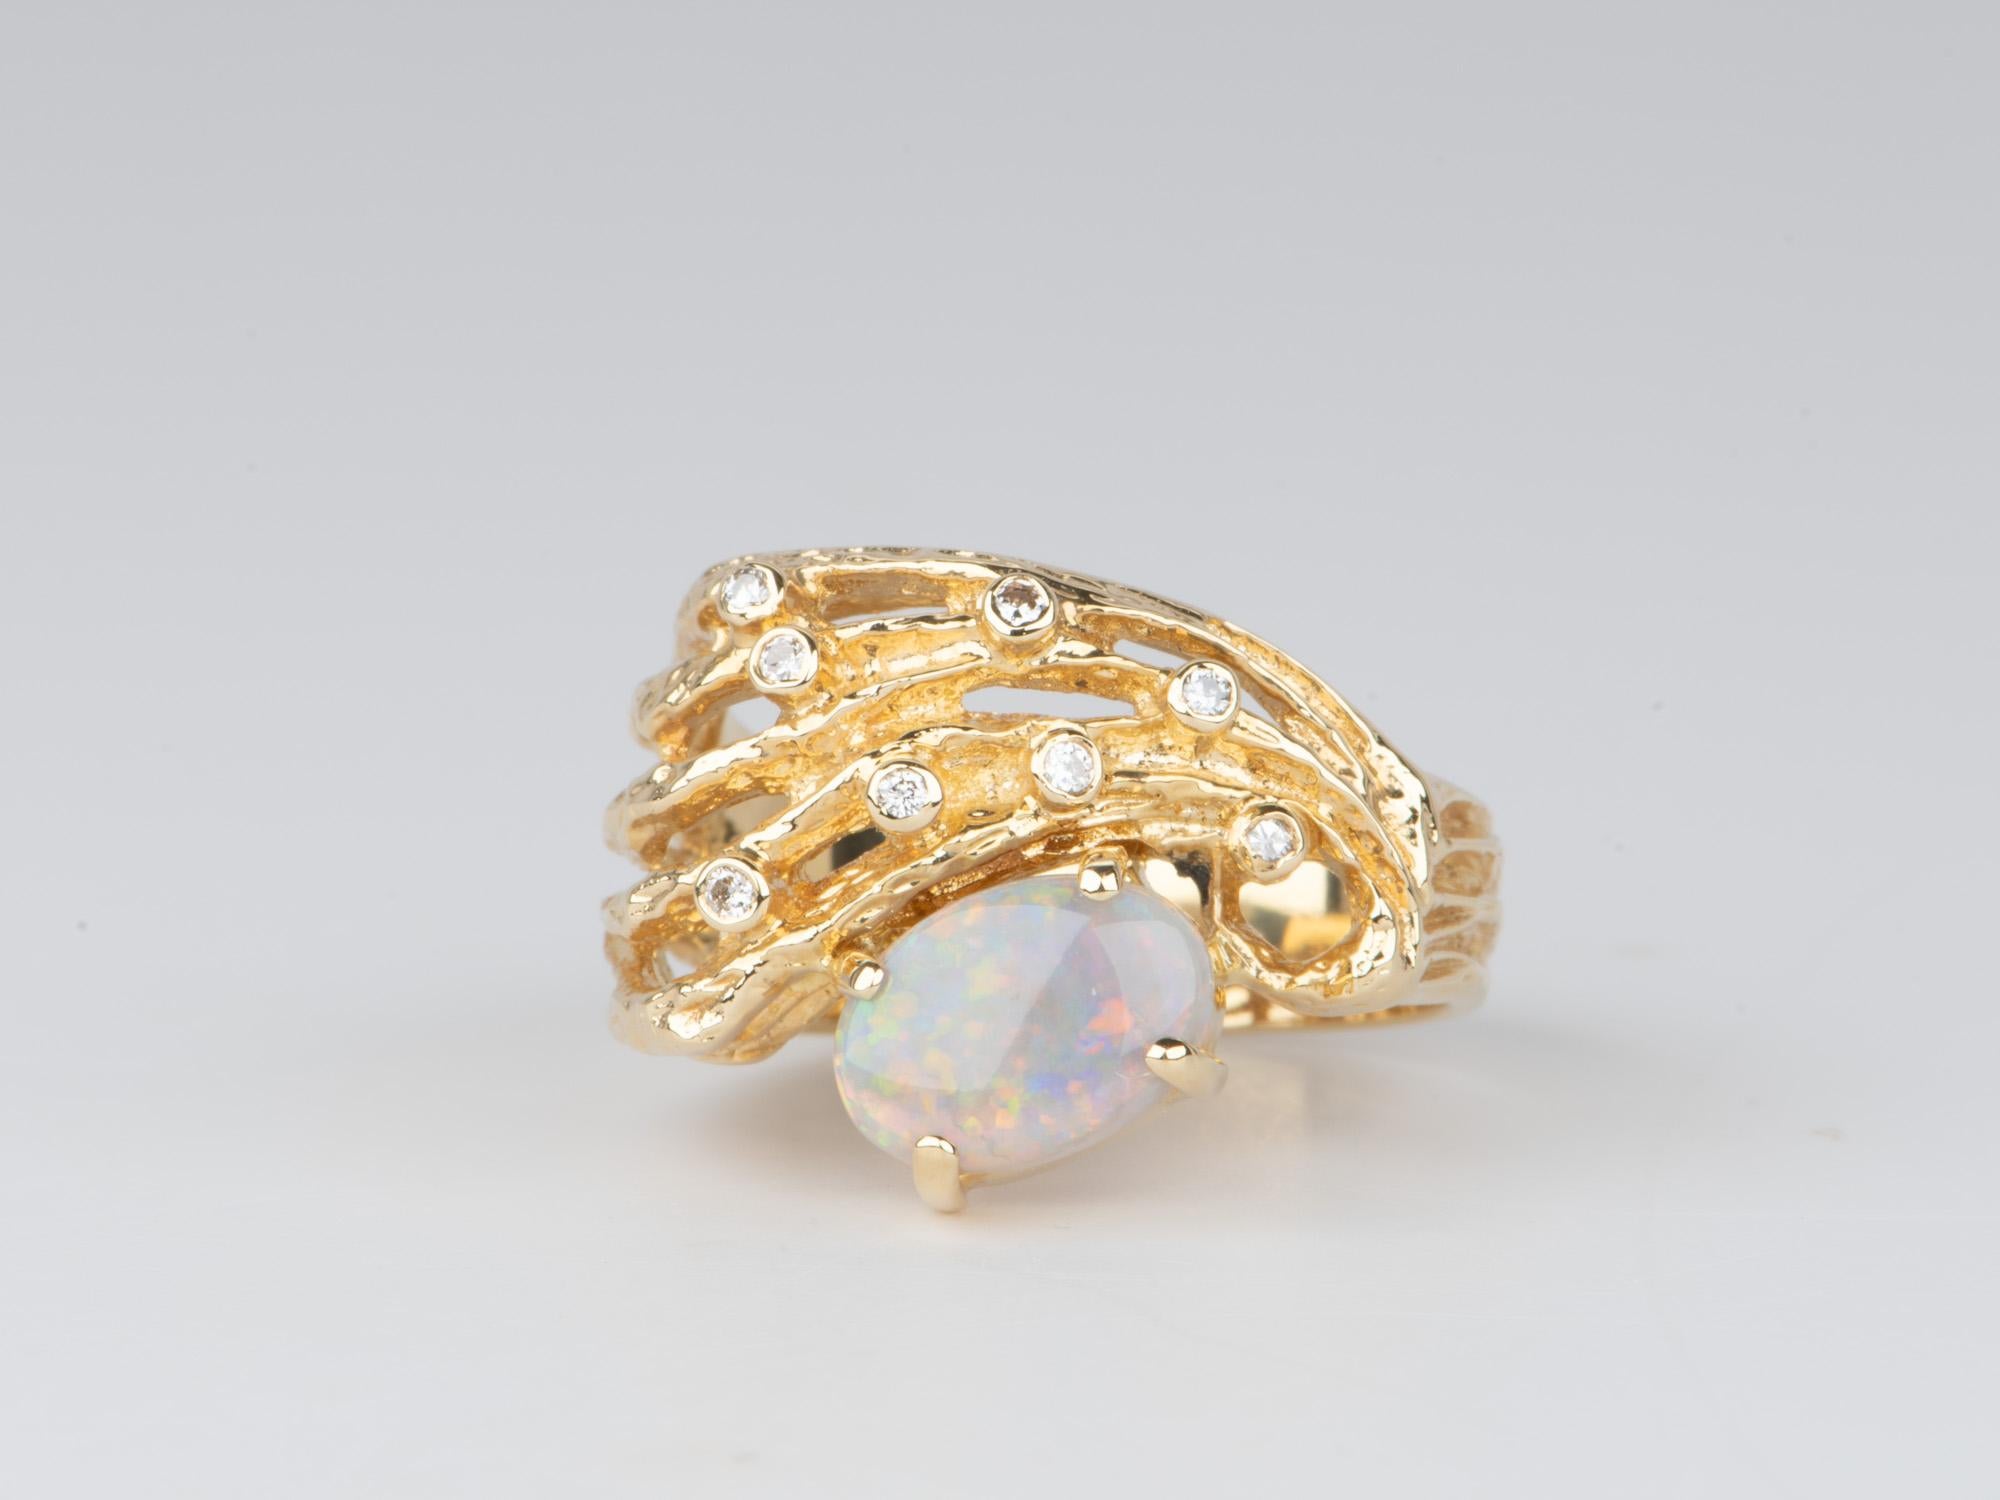 This captivating 18K gold chunky ring features a modernist design in a hand-carved organic style, set with a solid Australian opal and brilliant diamonds in bezel setting. Solidly made, this ring weighs 7.2g in gorgeous 18K gold and will feel